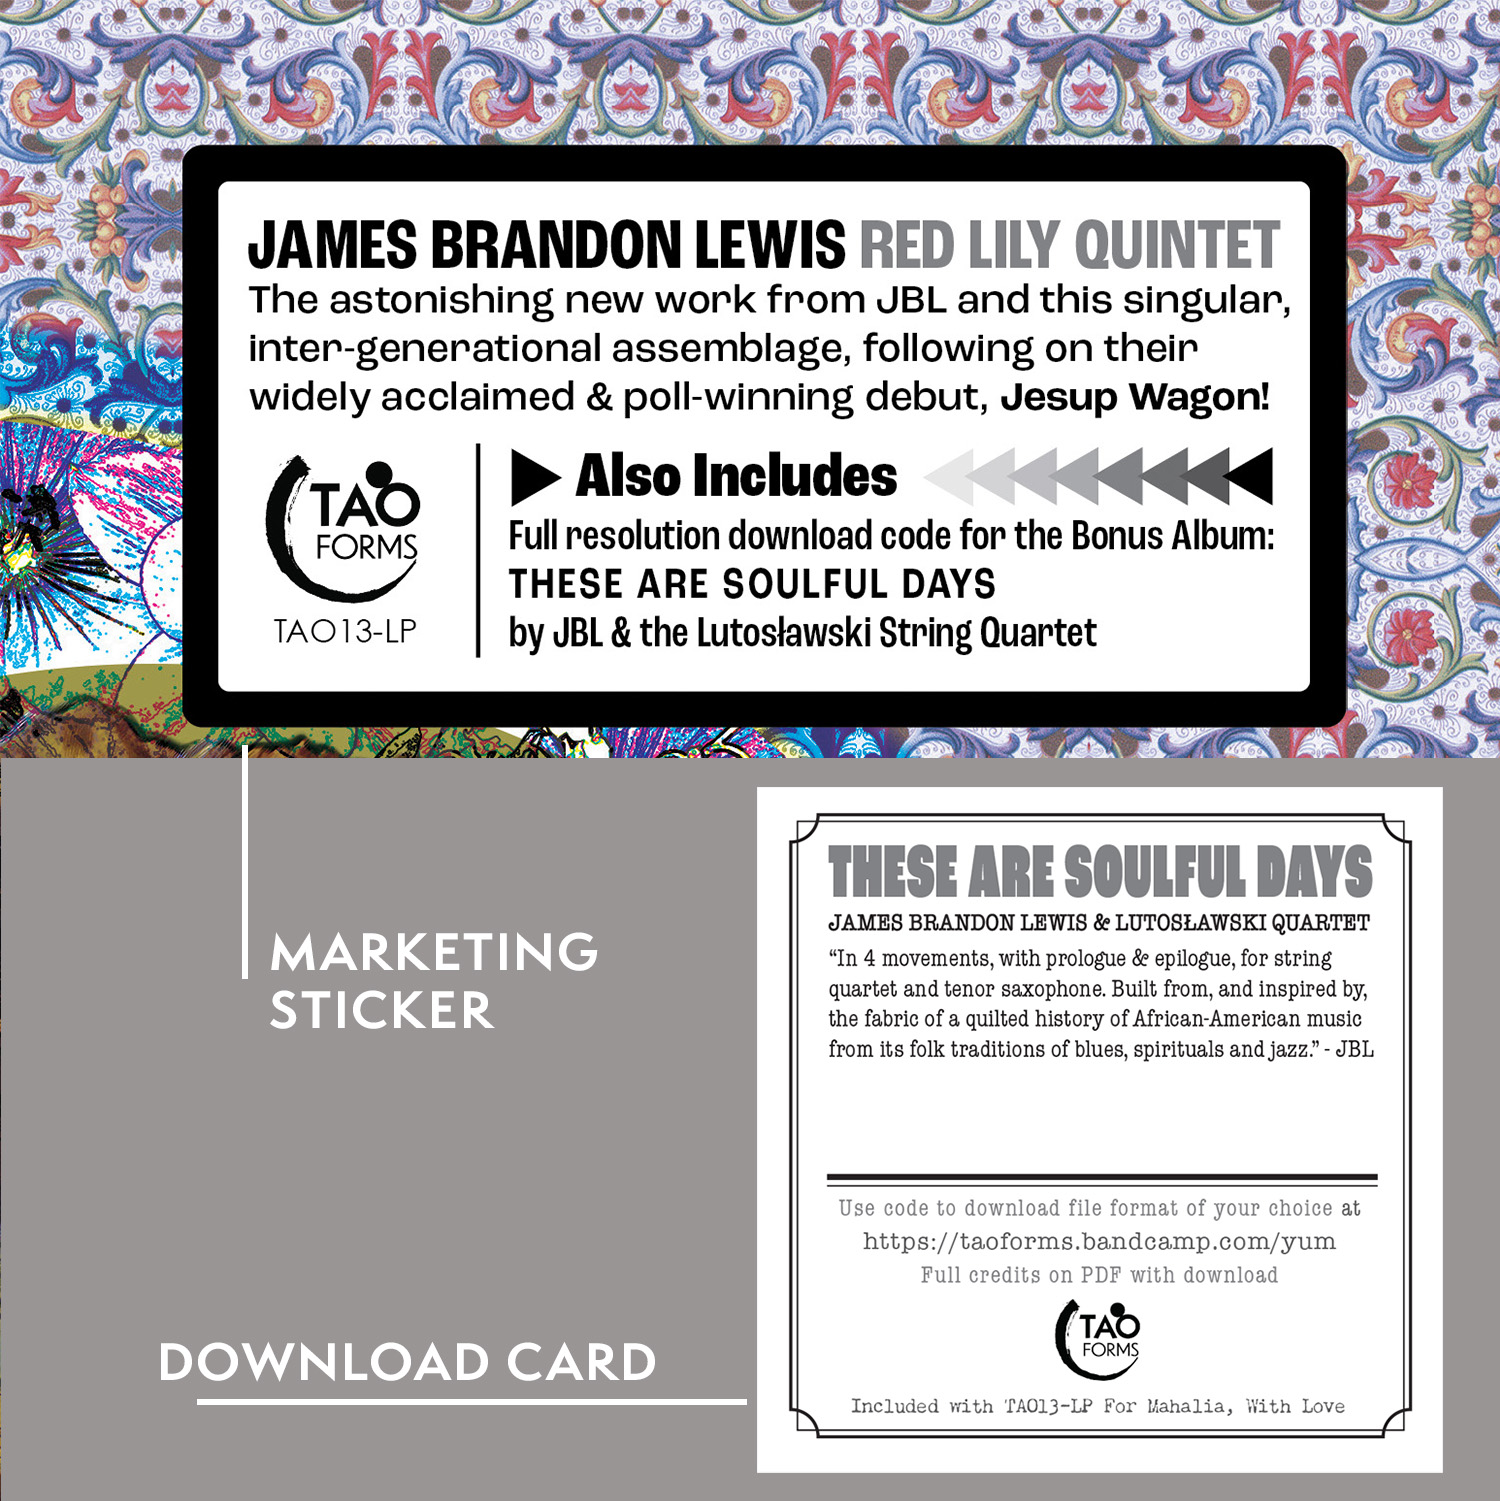 marketing sticker and download card for For Mahalia With Love by James Brandon Lewis Red Lily Quintet